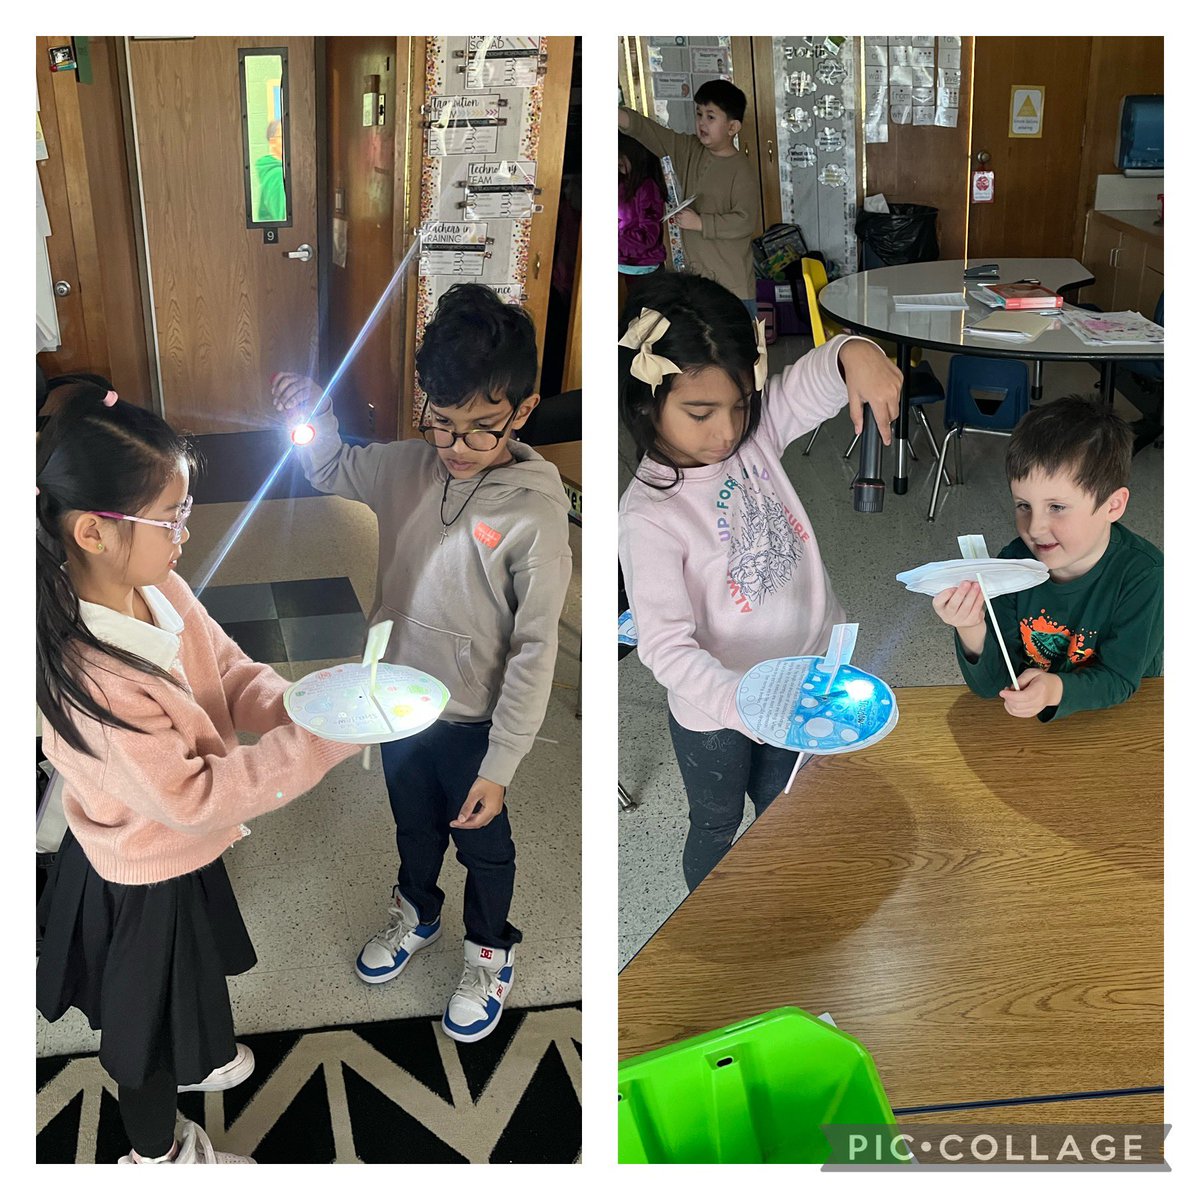 The groundhog may not have seen his shadow today but Room9 worked together to create their own shadows! 🐸 @CherryLaneCP1